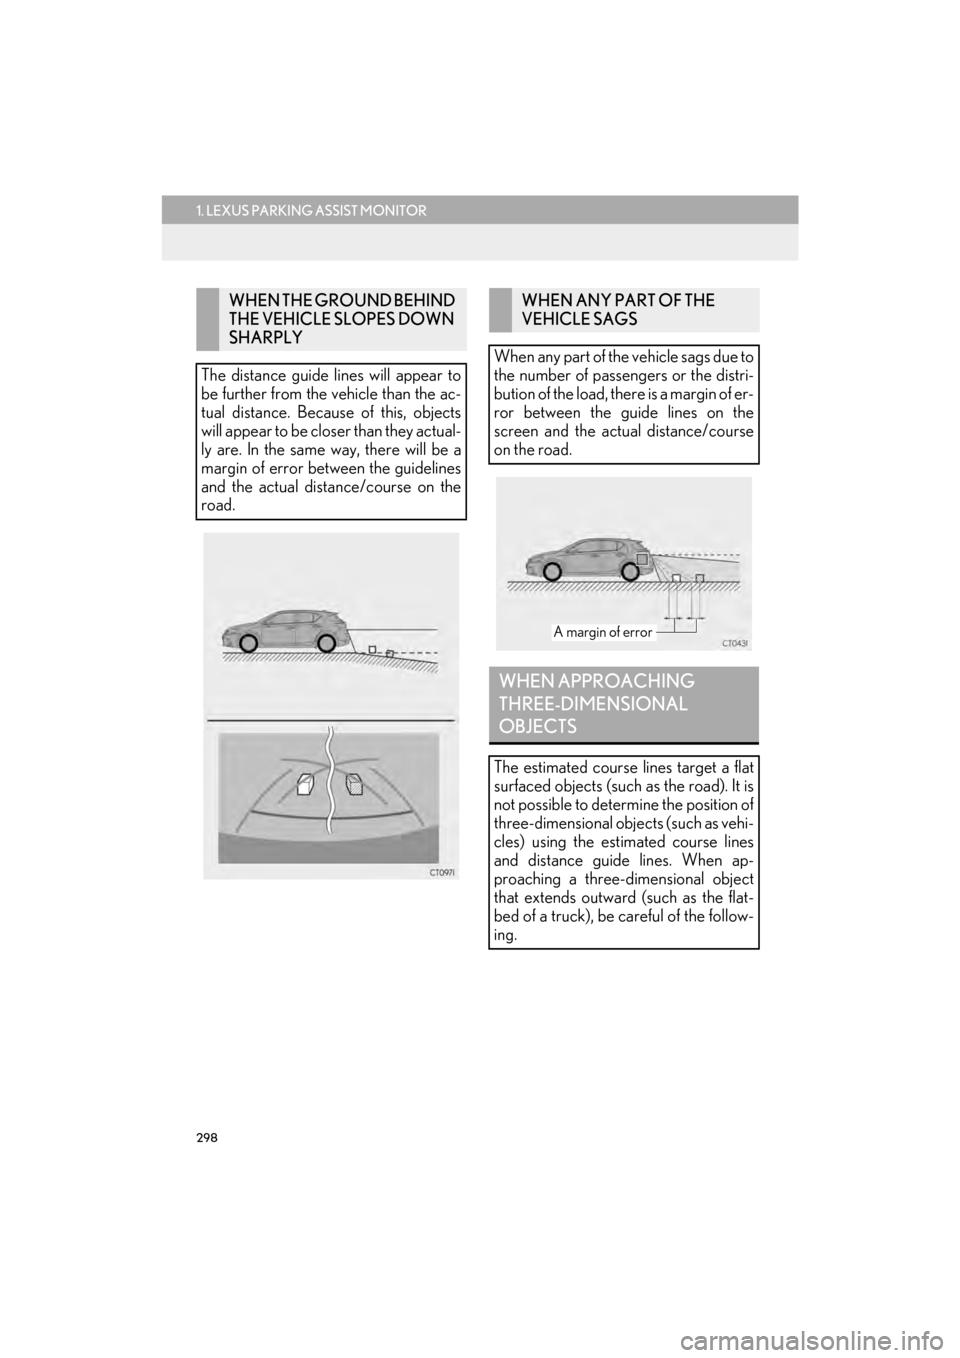 Lexus CT200h 2015  Navigation Manual (in English) 298
1. LEXUS PARKING ASSIST MONITOR
CT200h_Navi_OM76146U_(U)14.06.17     09:48
WHEN THE GROUND BEHIND 
THE VEHICLE SLOPES DOWN 
SHARPLY
The distance guide lines will appear to
be further from the vehi